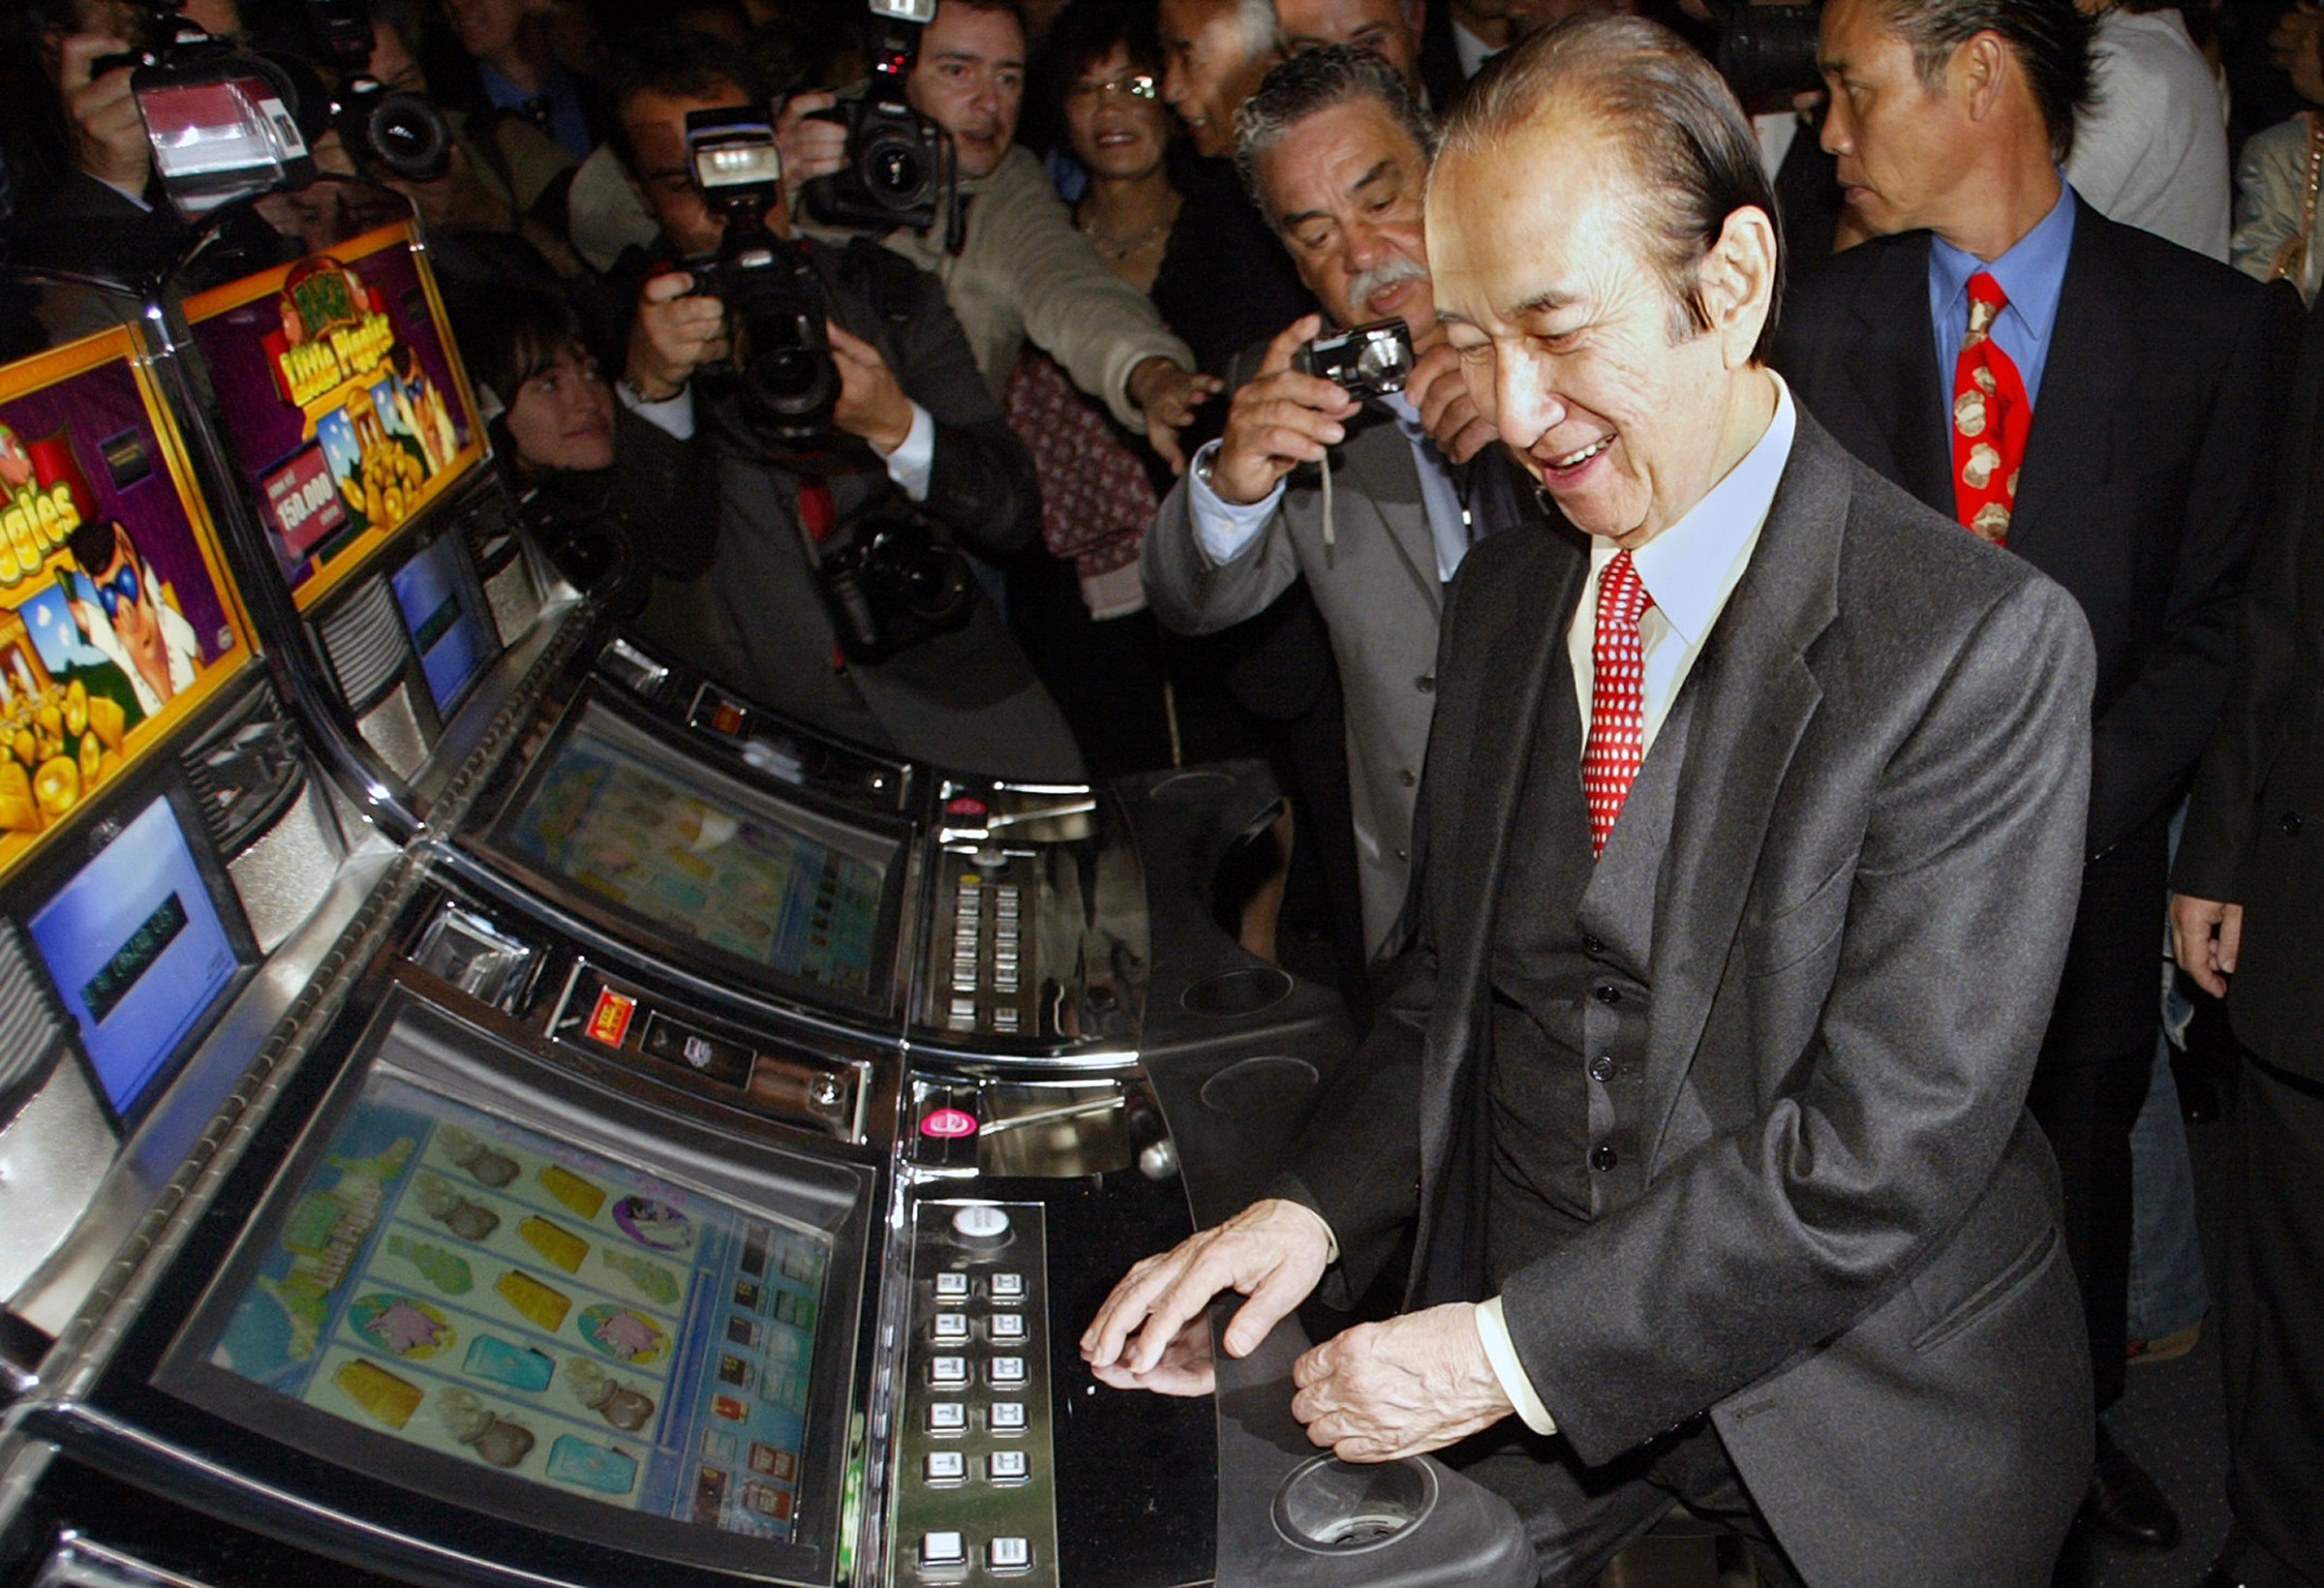 Stanley Ho playing a slot machine at the opening of his new casino in downtown Lisbon in April 2006. Photo: AFP